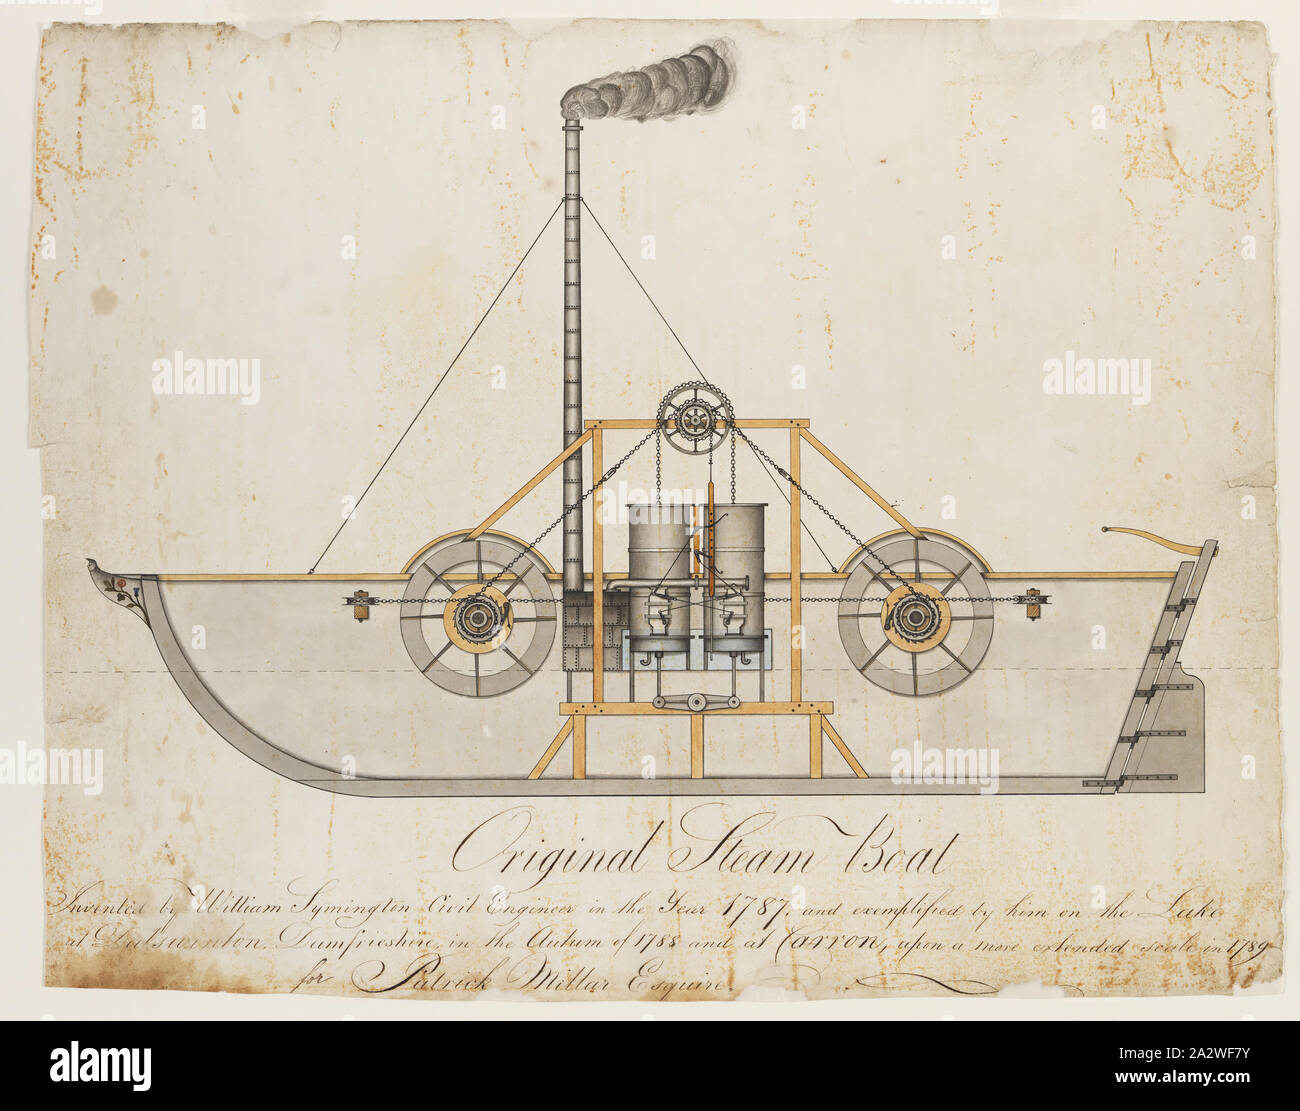 Engineering Drawing - William Symington, Original Steam Boat for Patrick Miller Esq, 1787-1788, Ink and water-colour technical drawing showing a longitudinal cross-sectional elevation of the first paddlesteamer built by the Scottish engineer and inventor, William Symington, C.E., with assistance from James Taylor and others, in 1787-88. The vessel depicted is an experimental steam-powered paddleboat built for Patrick Miller Esq., a prominent Edinburgh merchant and banker. Late in 1787 Stock Photo